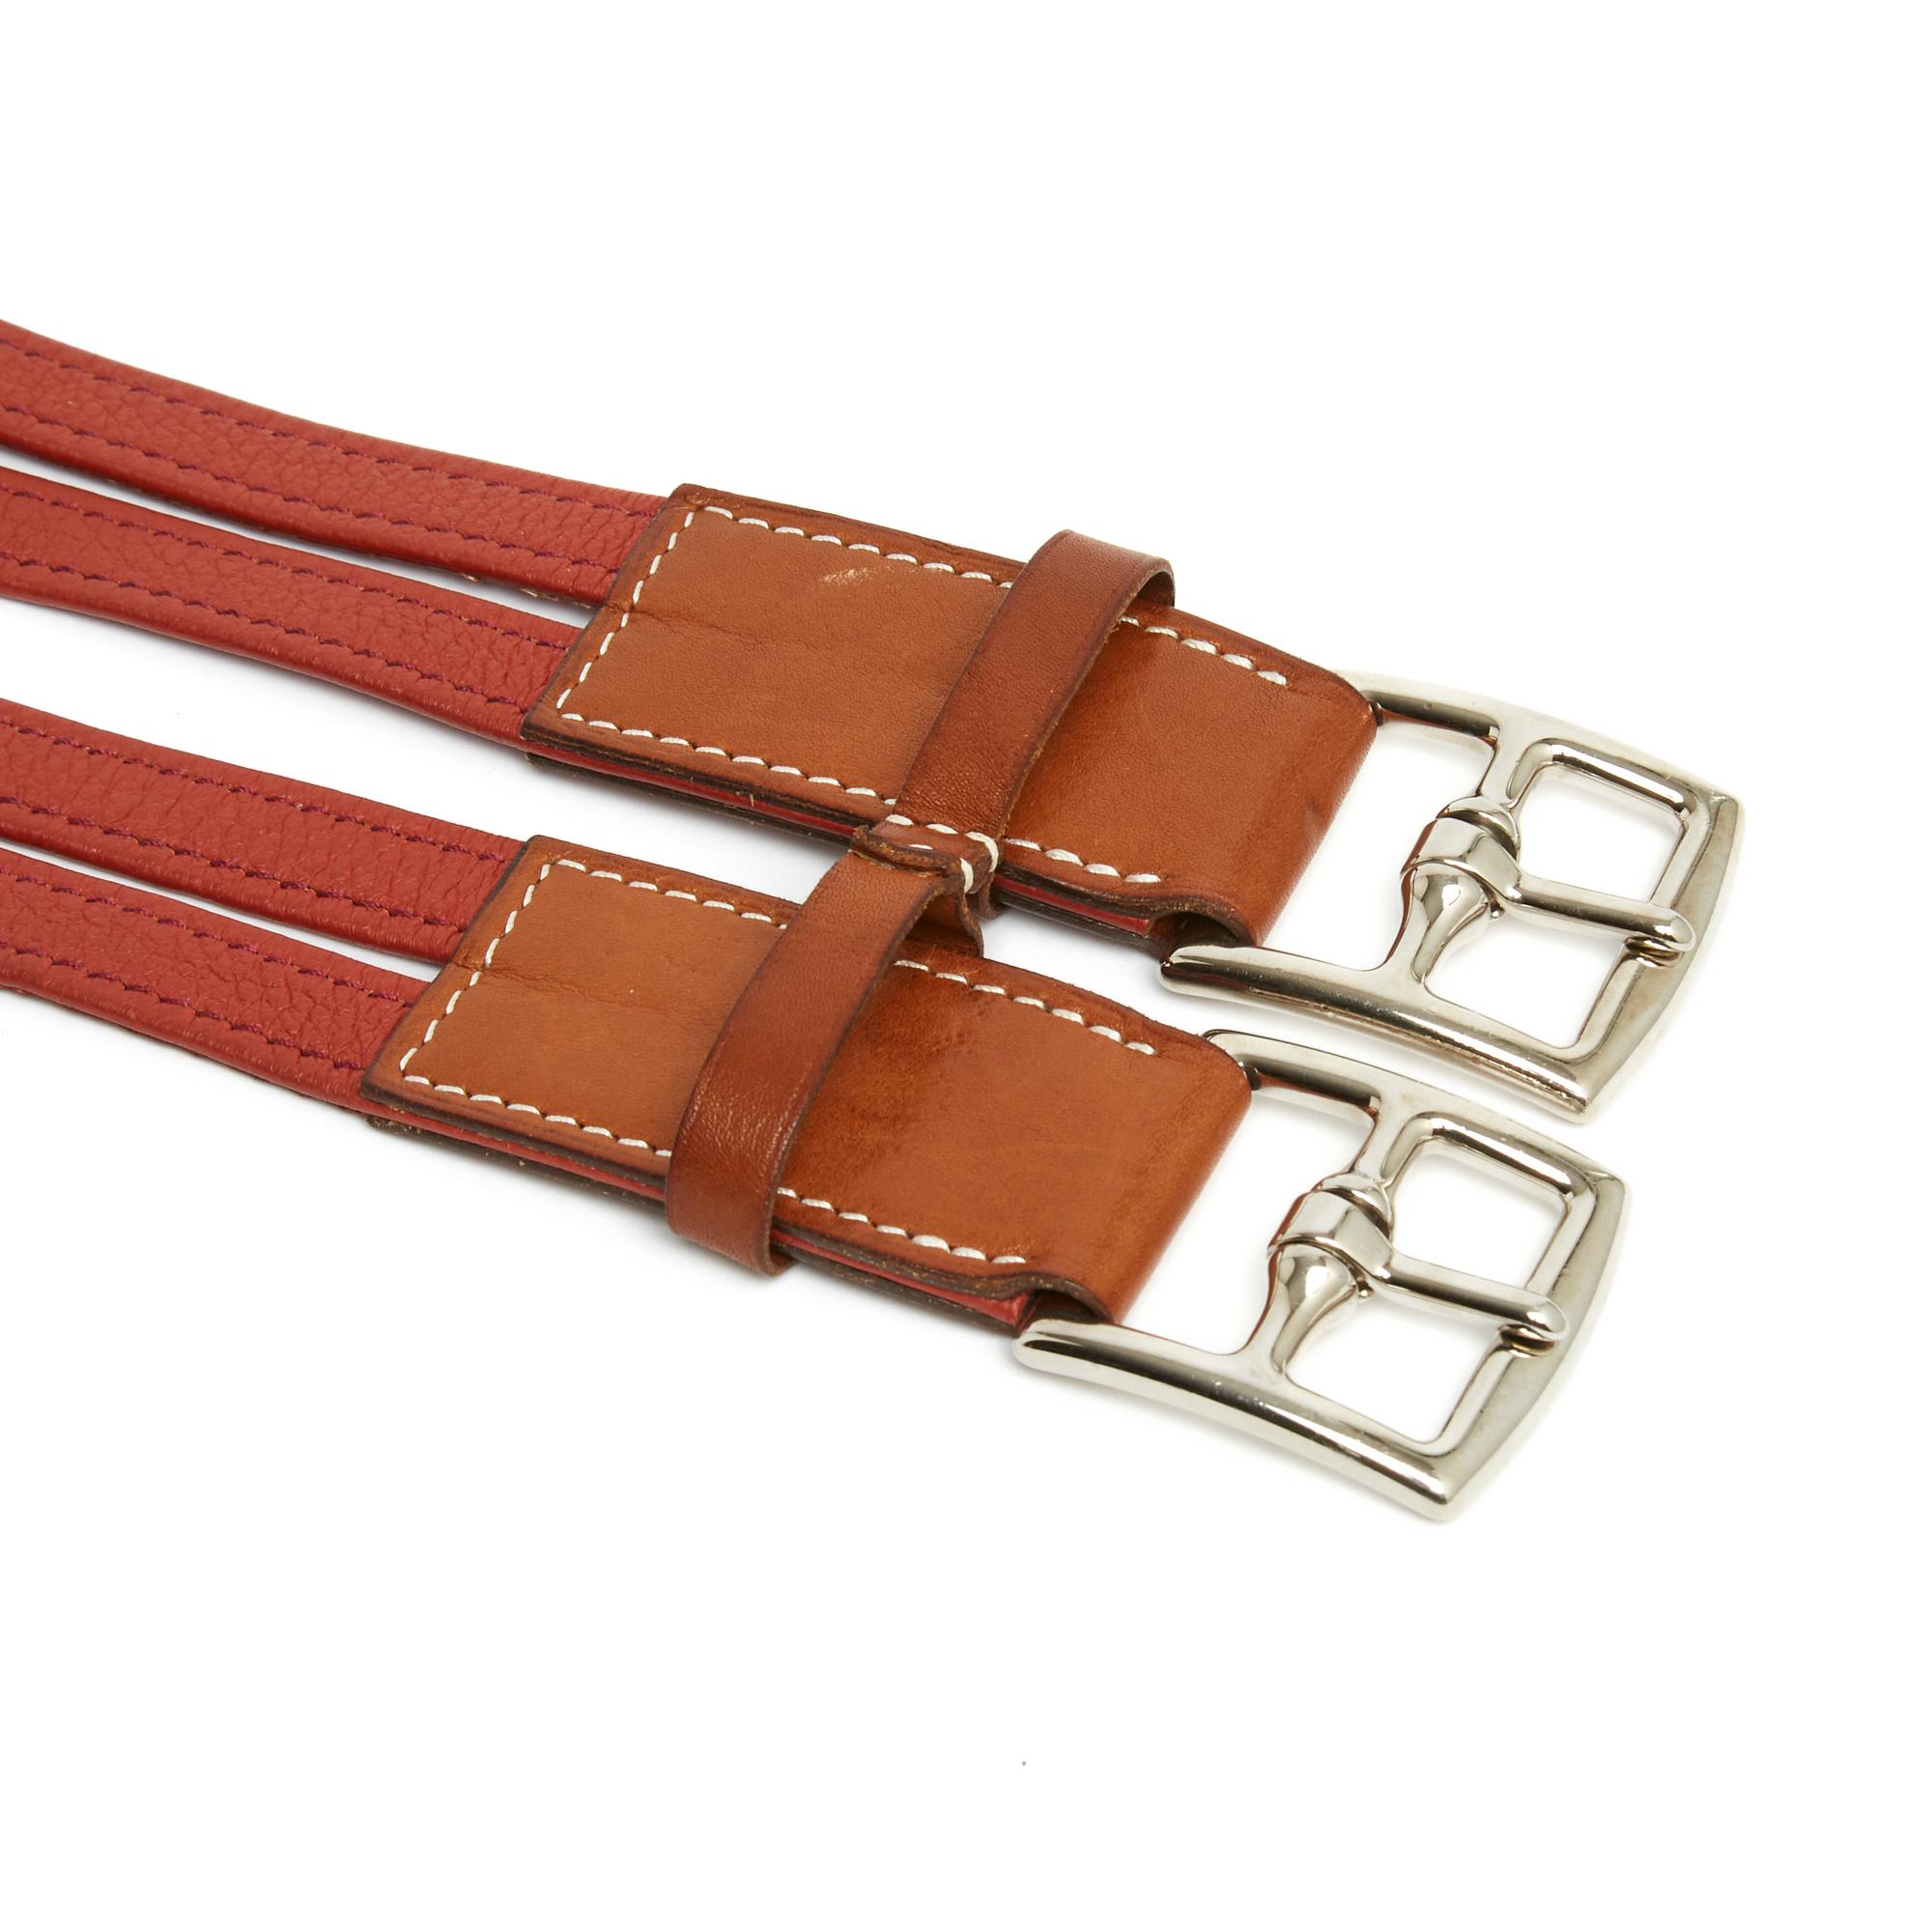 Hermès belt, double Etrivière model, in terracotta red grained leather and natural leather, silver metal buckles (palladium). of the belt 7.75 cm. The belt comes from private sales and it has been worn but it remains in very good condition,